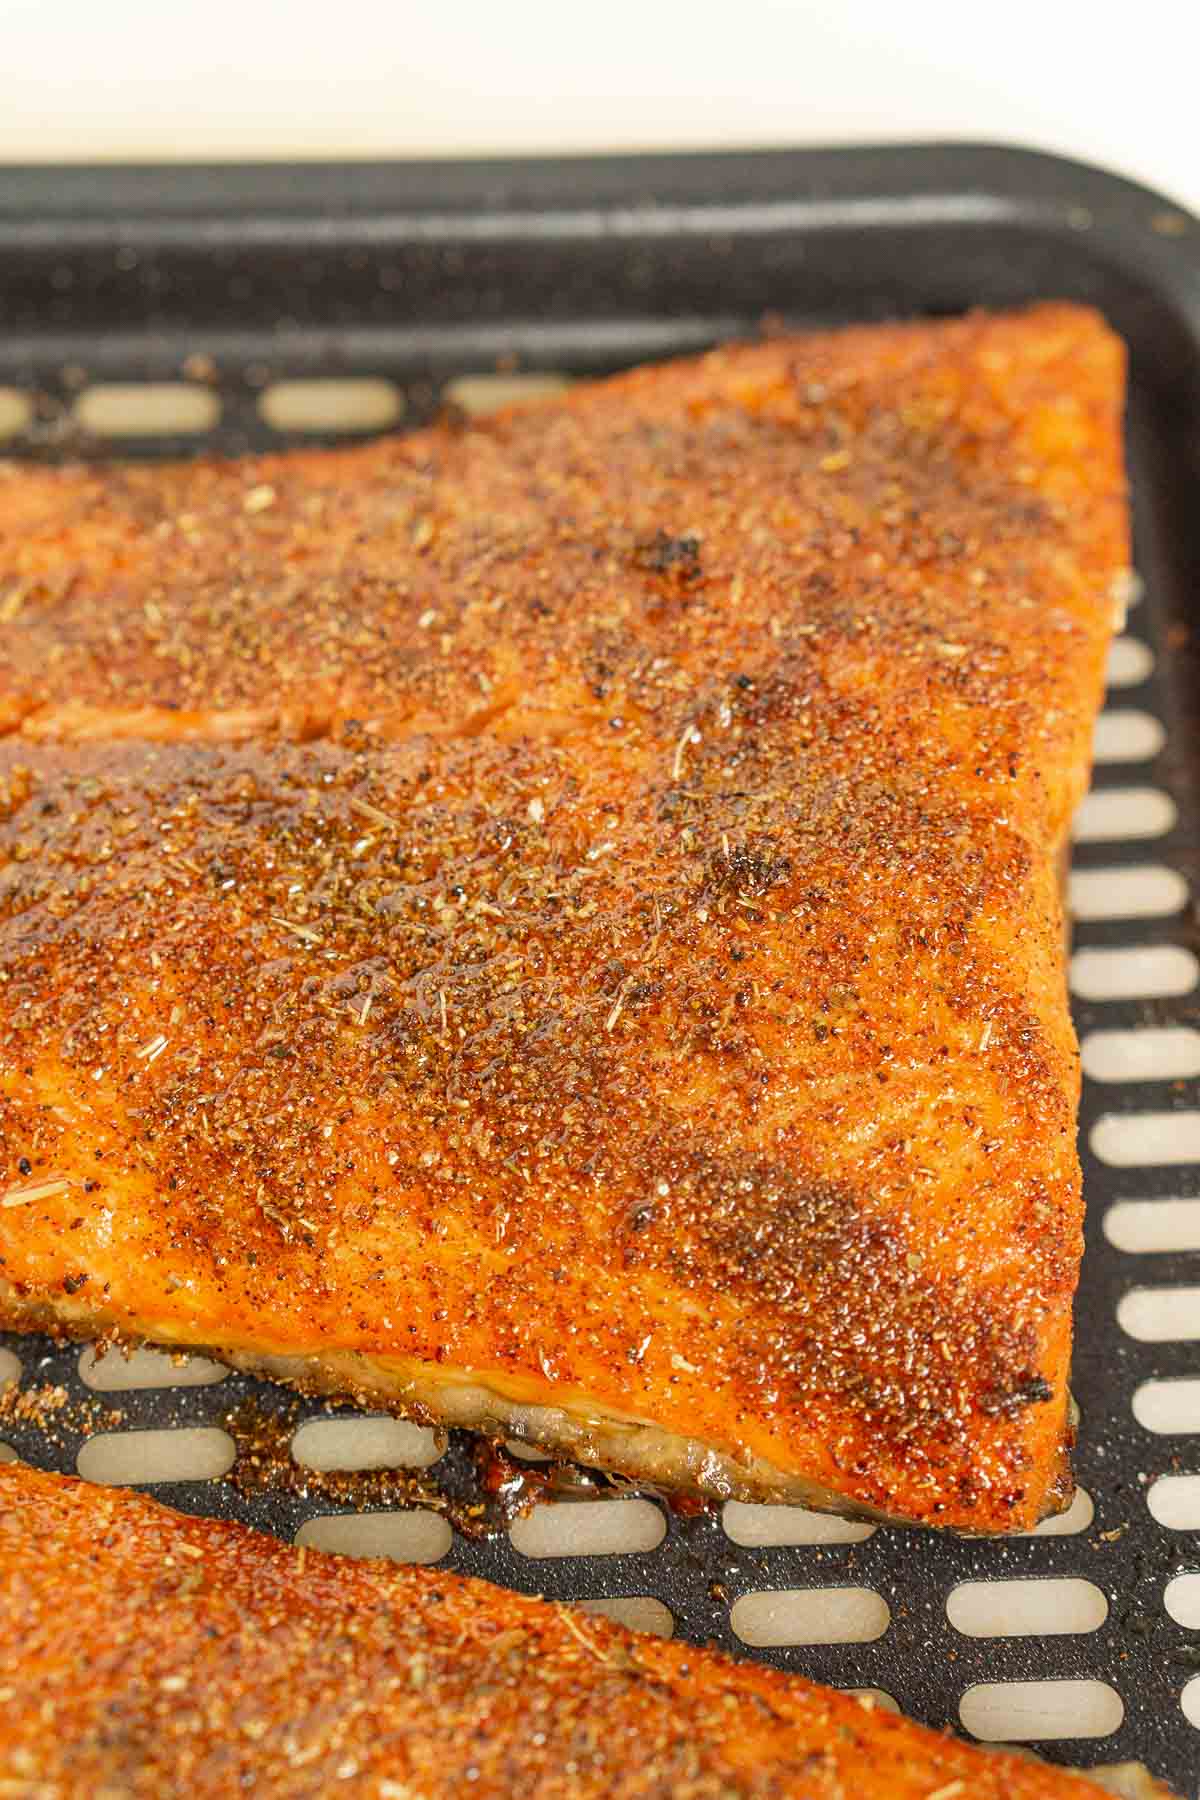 Cooked trout in an air fryer tray